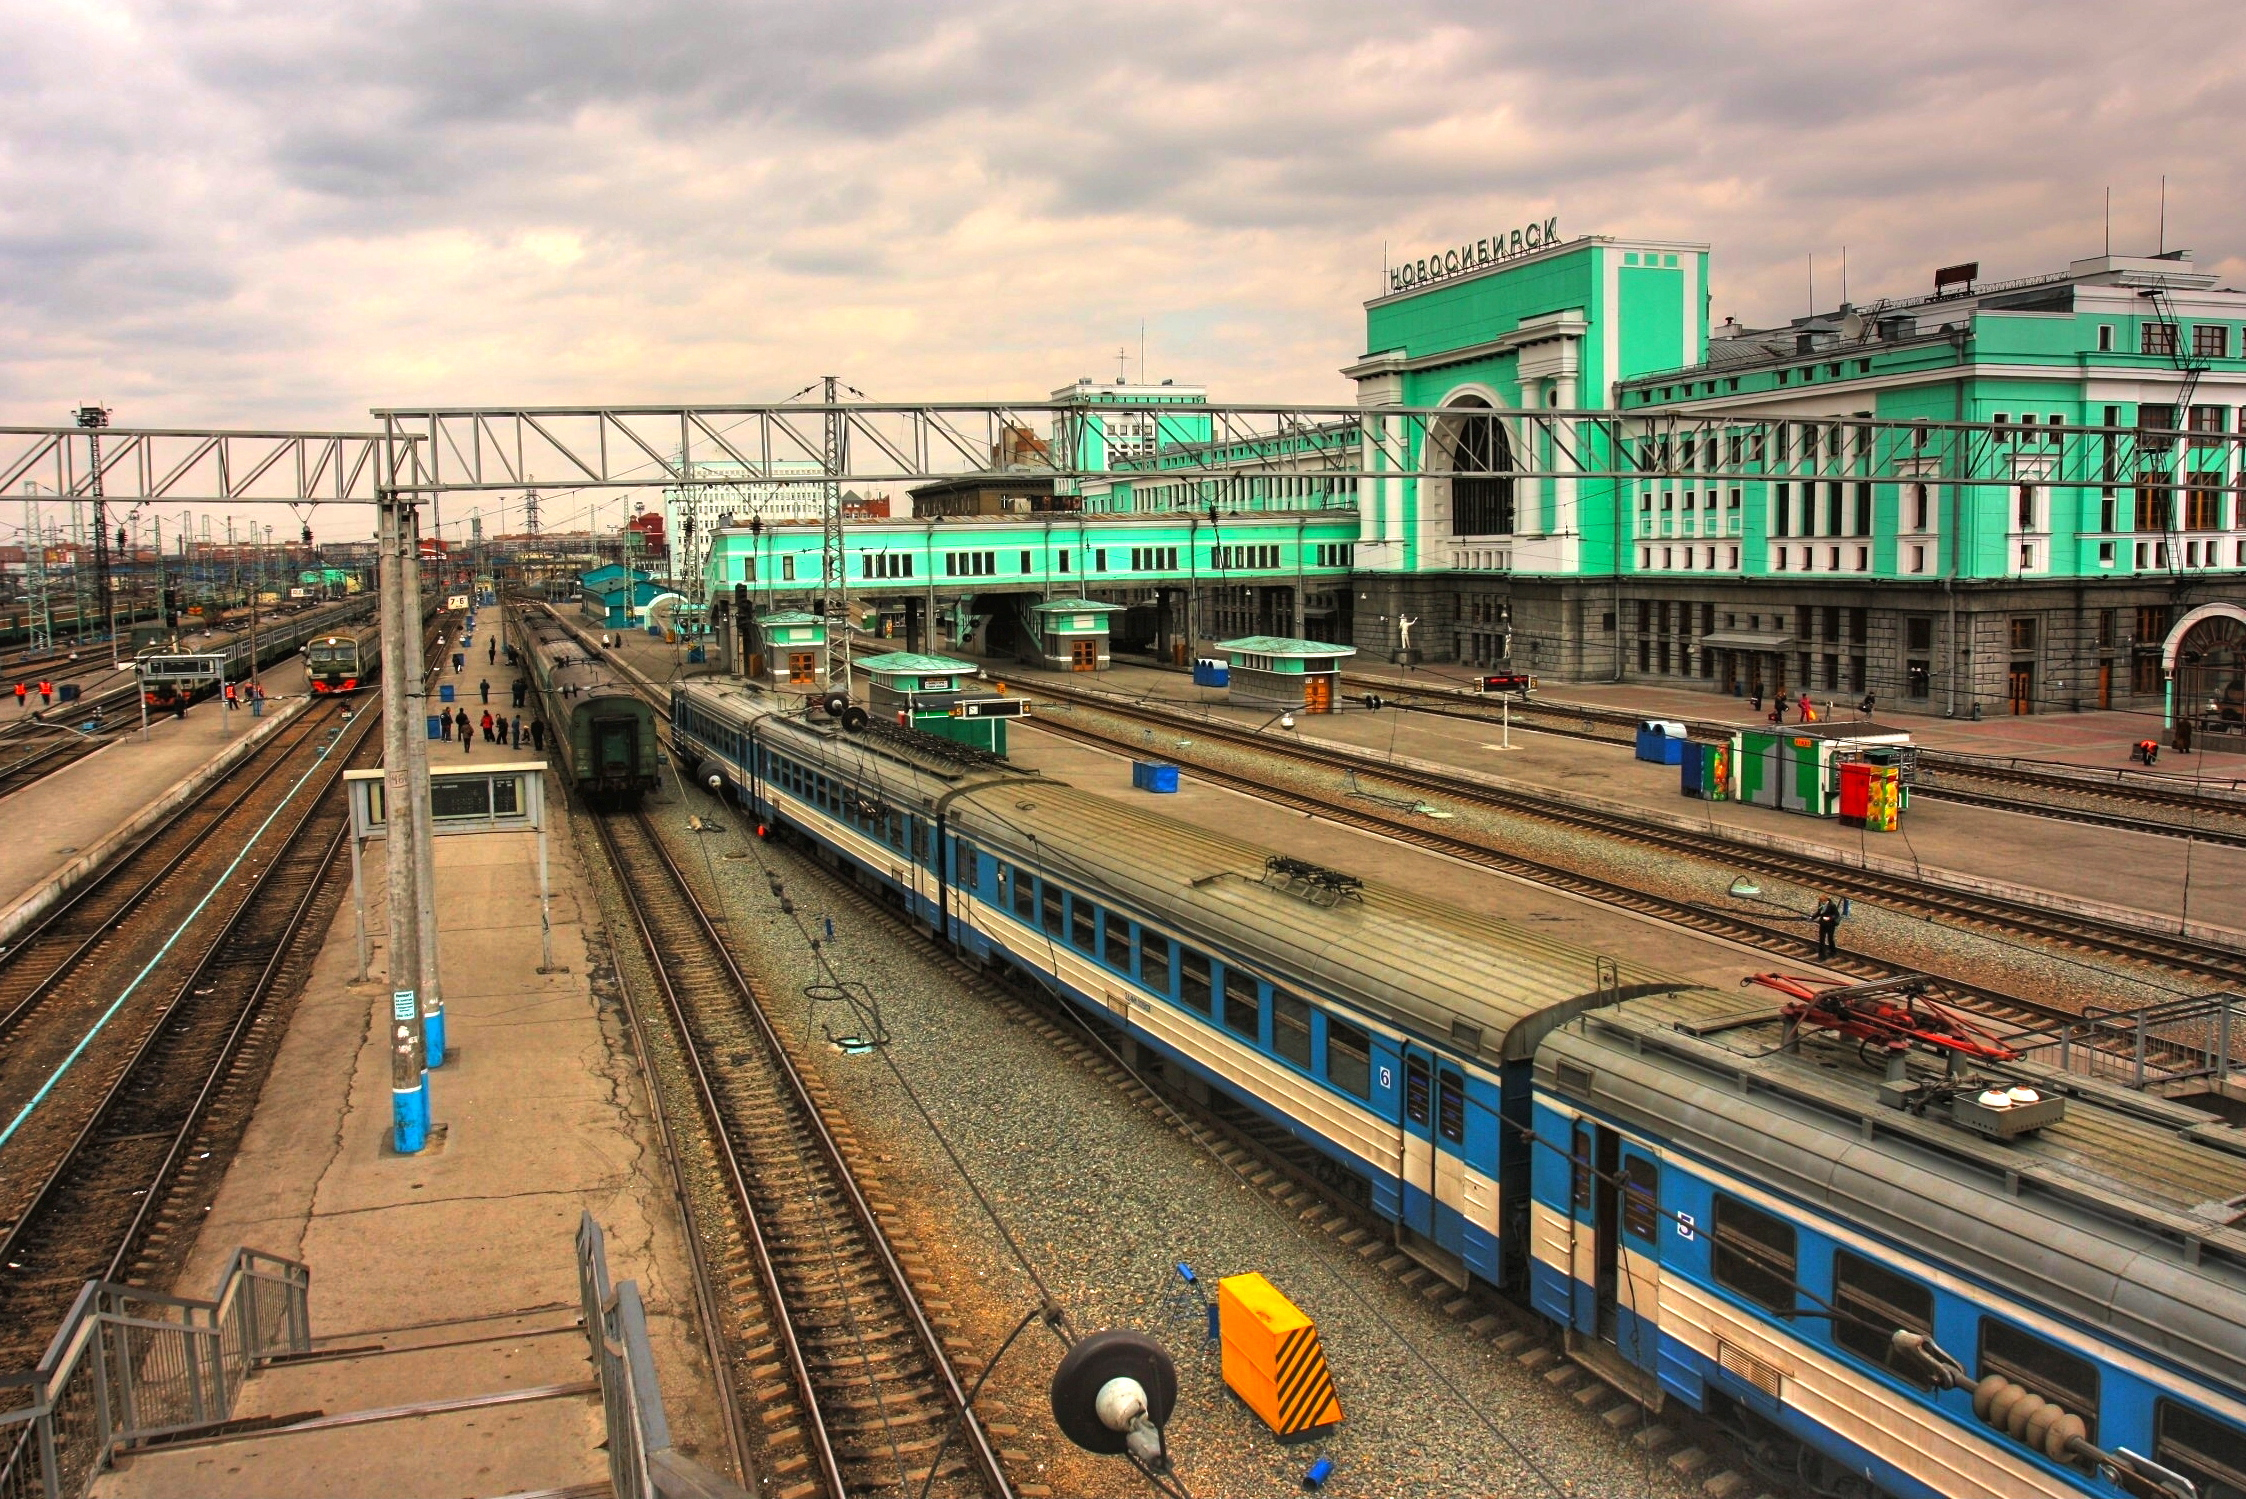 Novosibirsk is the third-largest city in Russia, after Moscow and Saint Petersburg, and the largest city of Siberia.